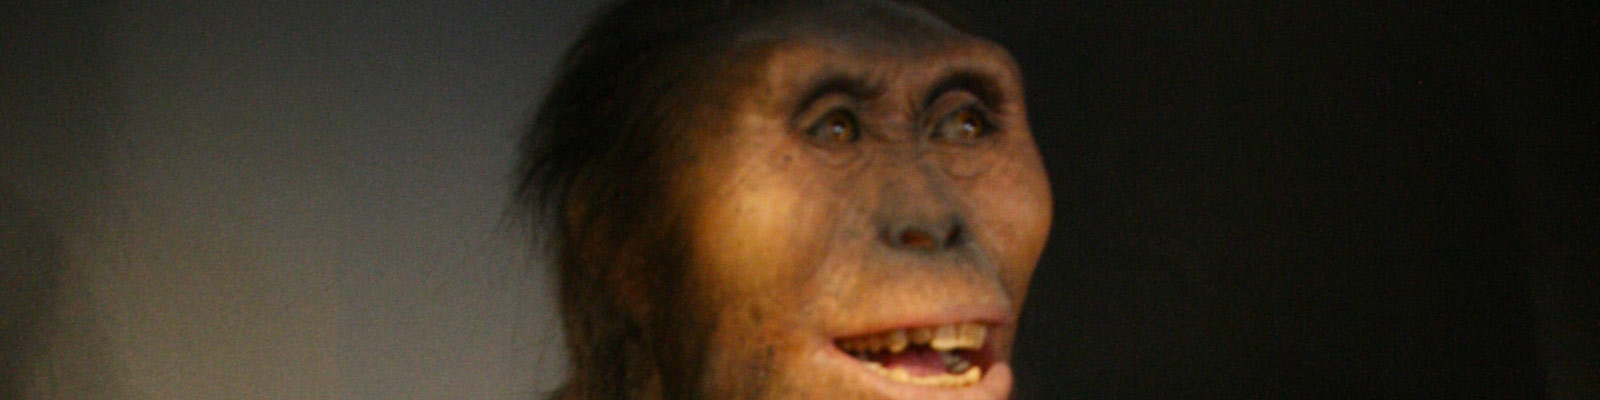 Lucy, one of the oldest hominids in the fossil record.